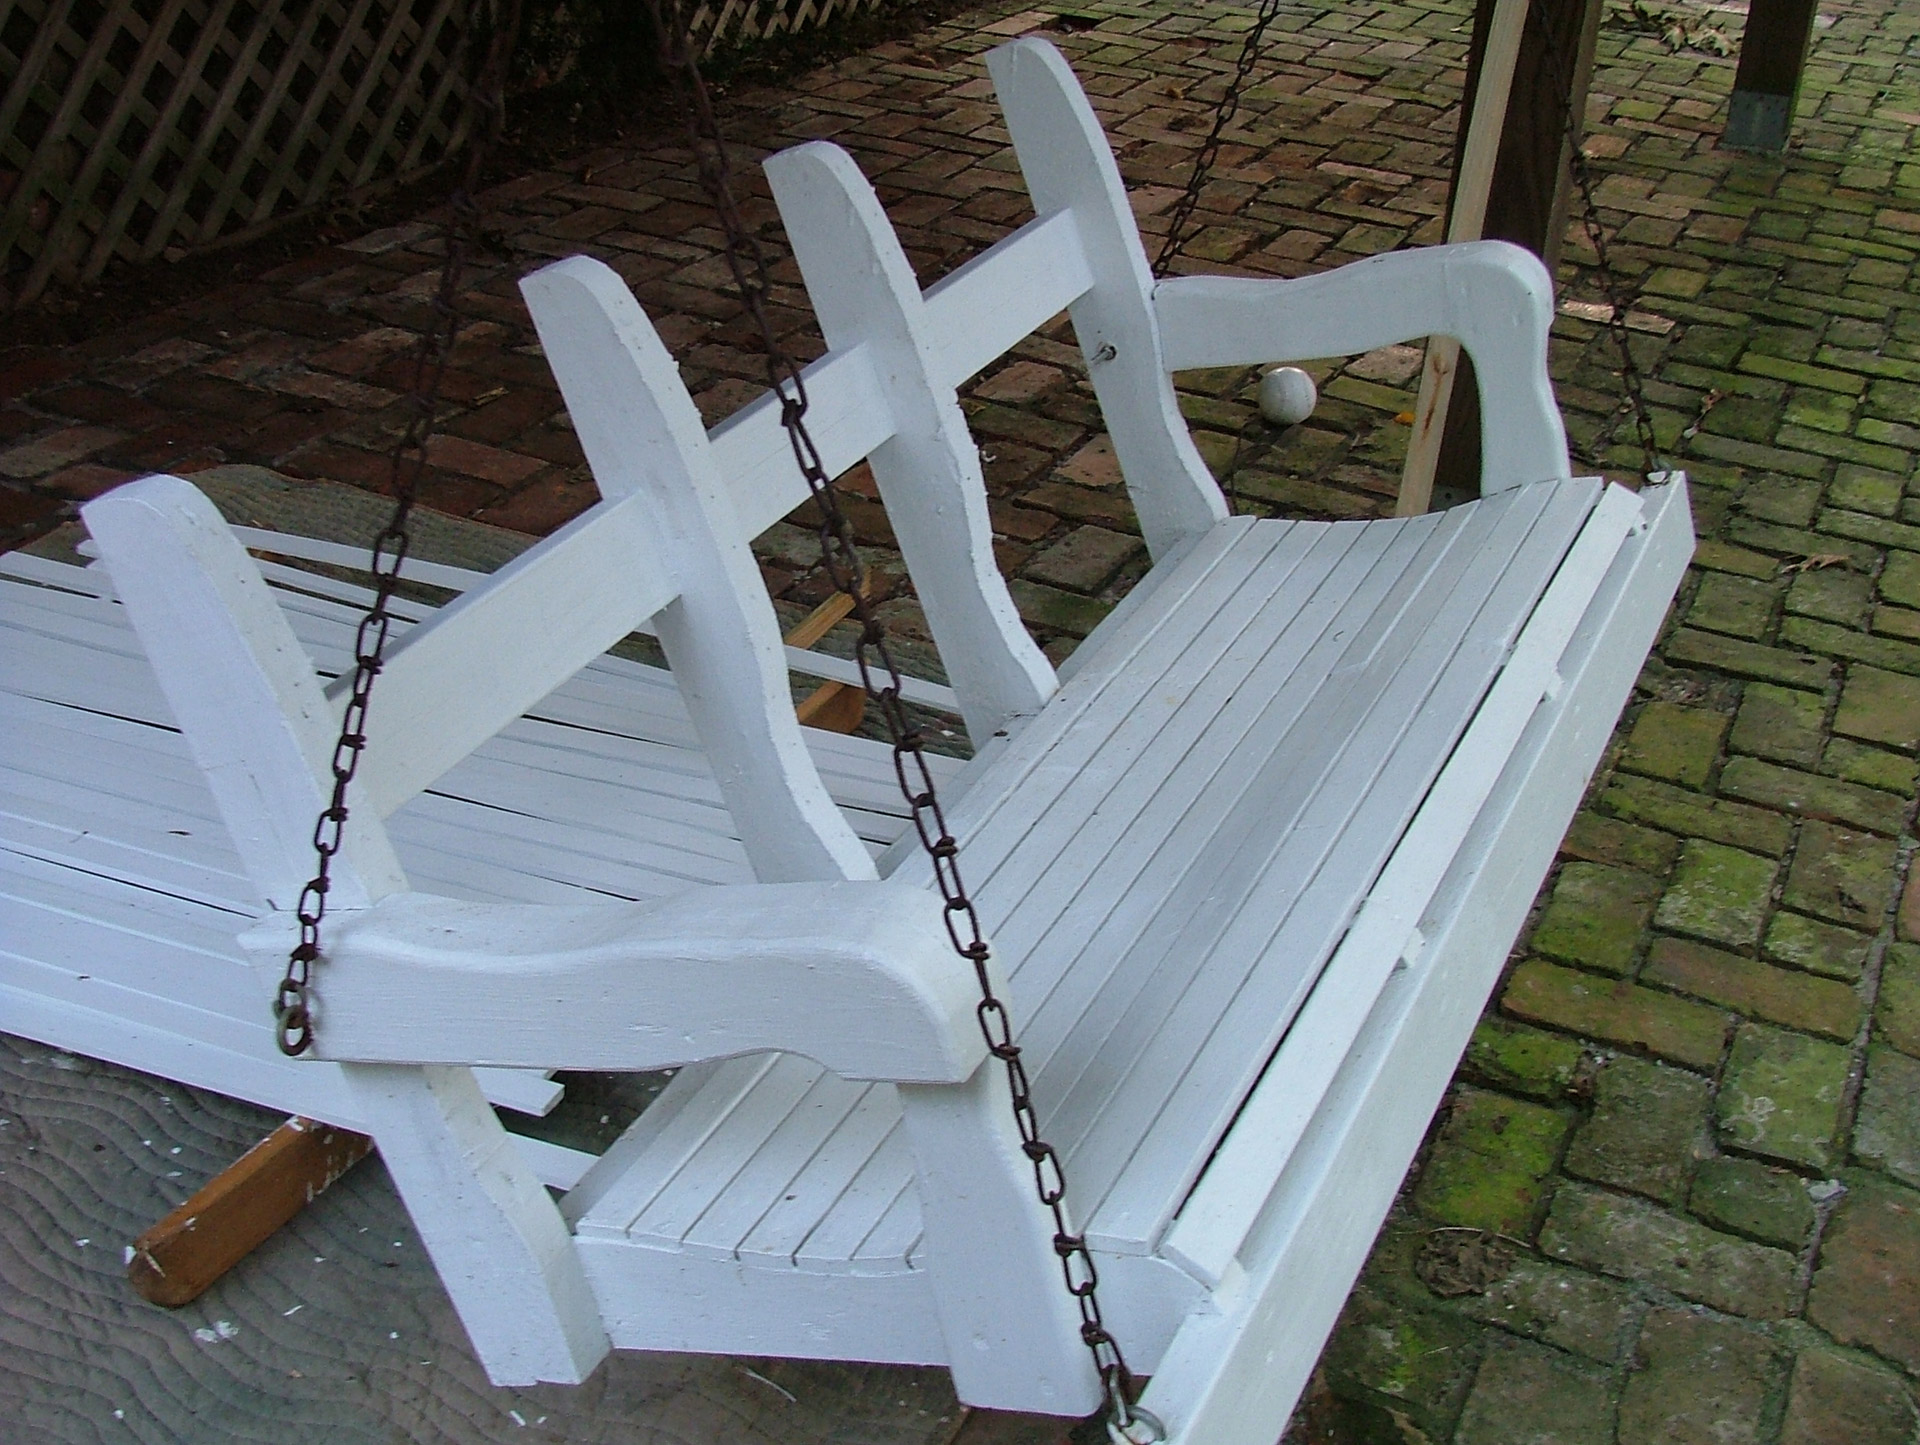 constructing and painting a porch swing